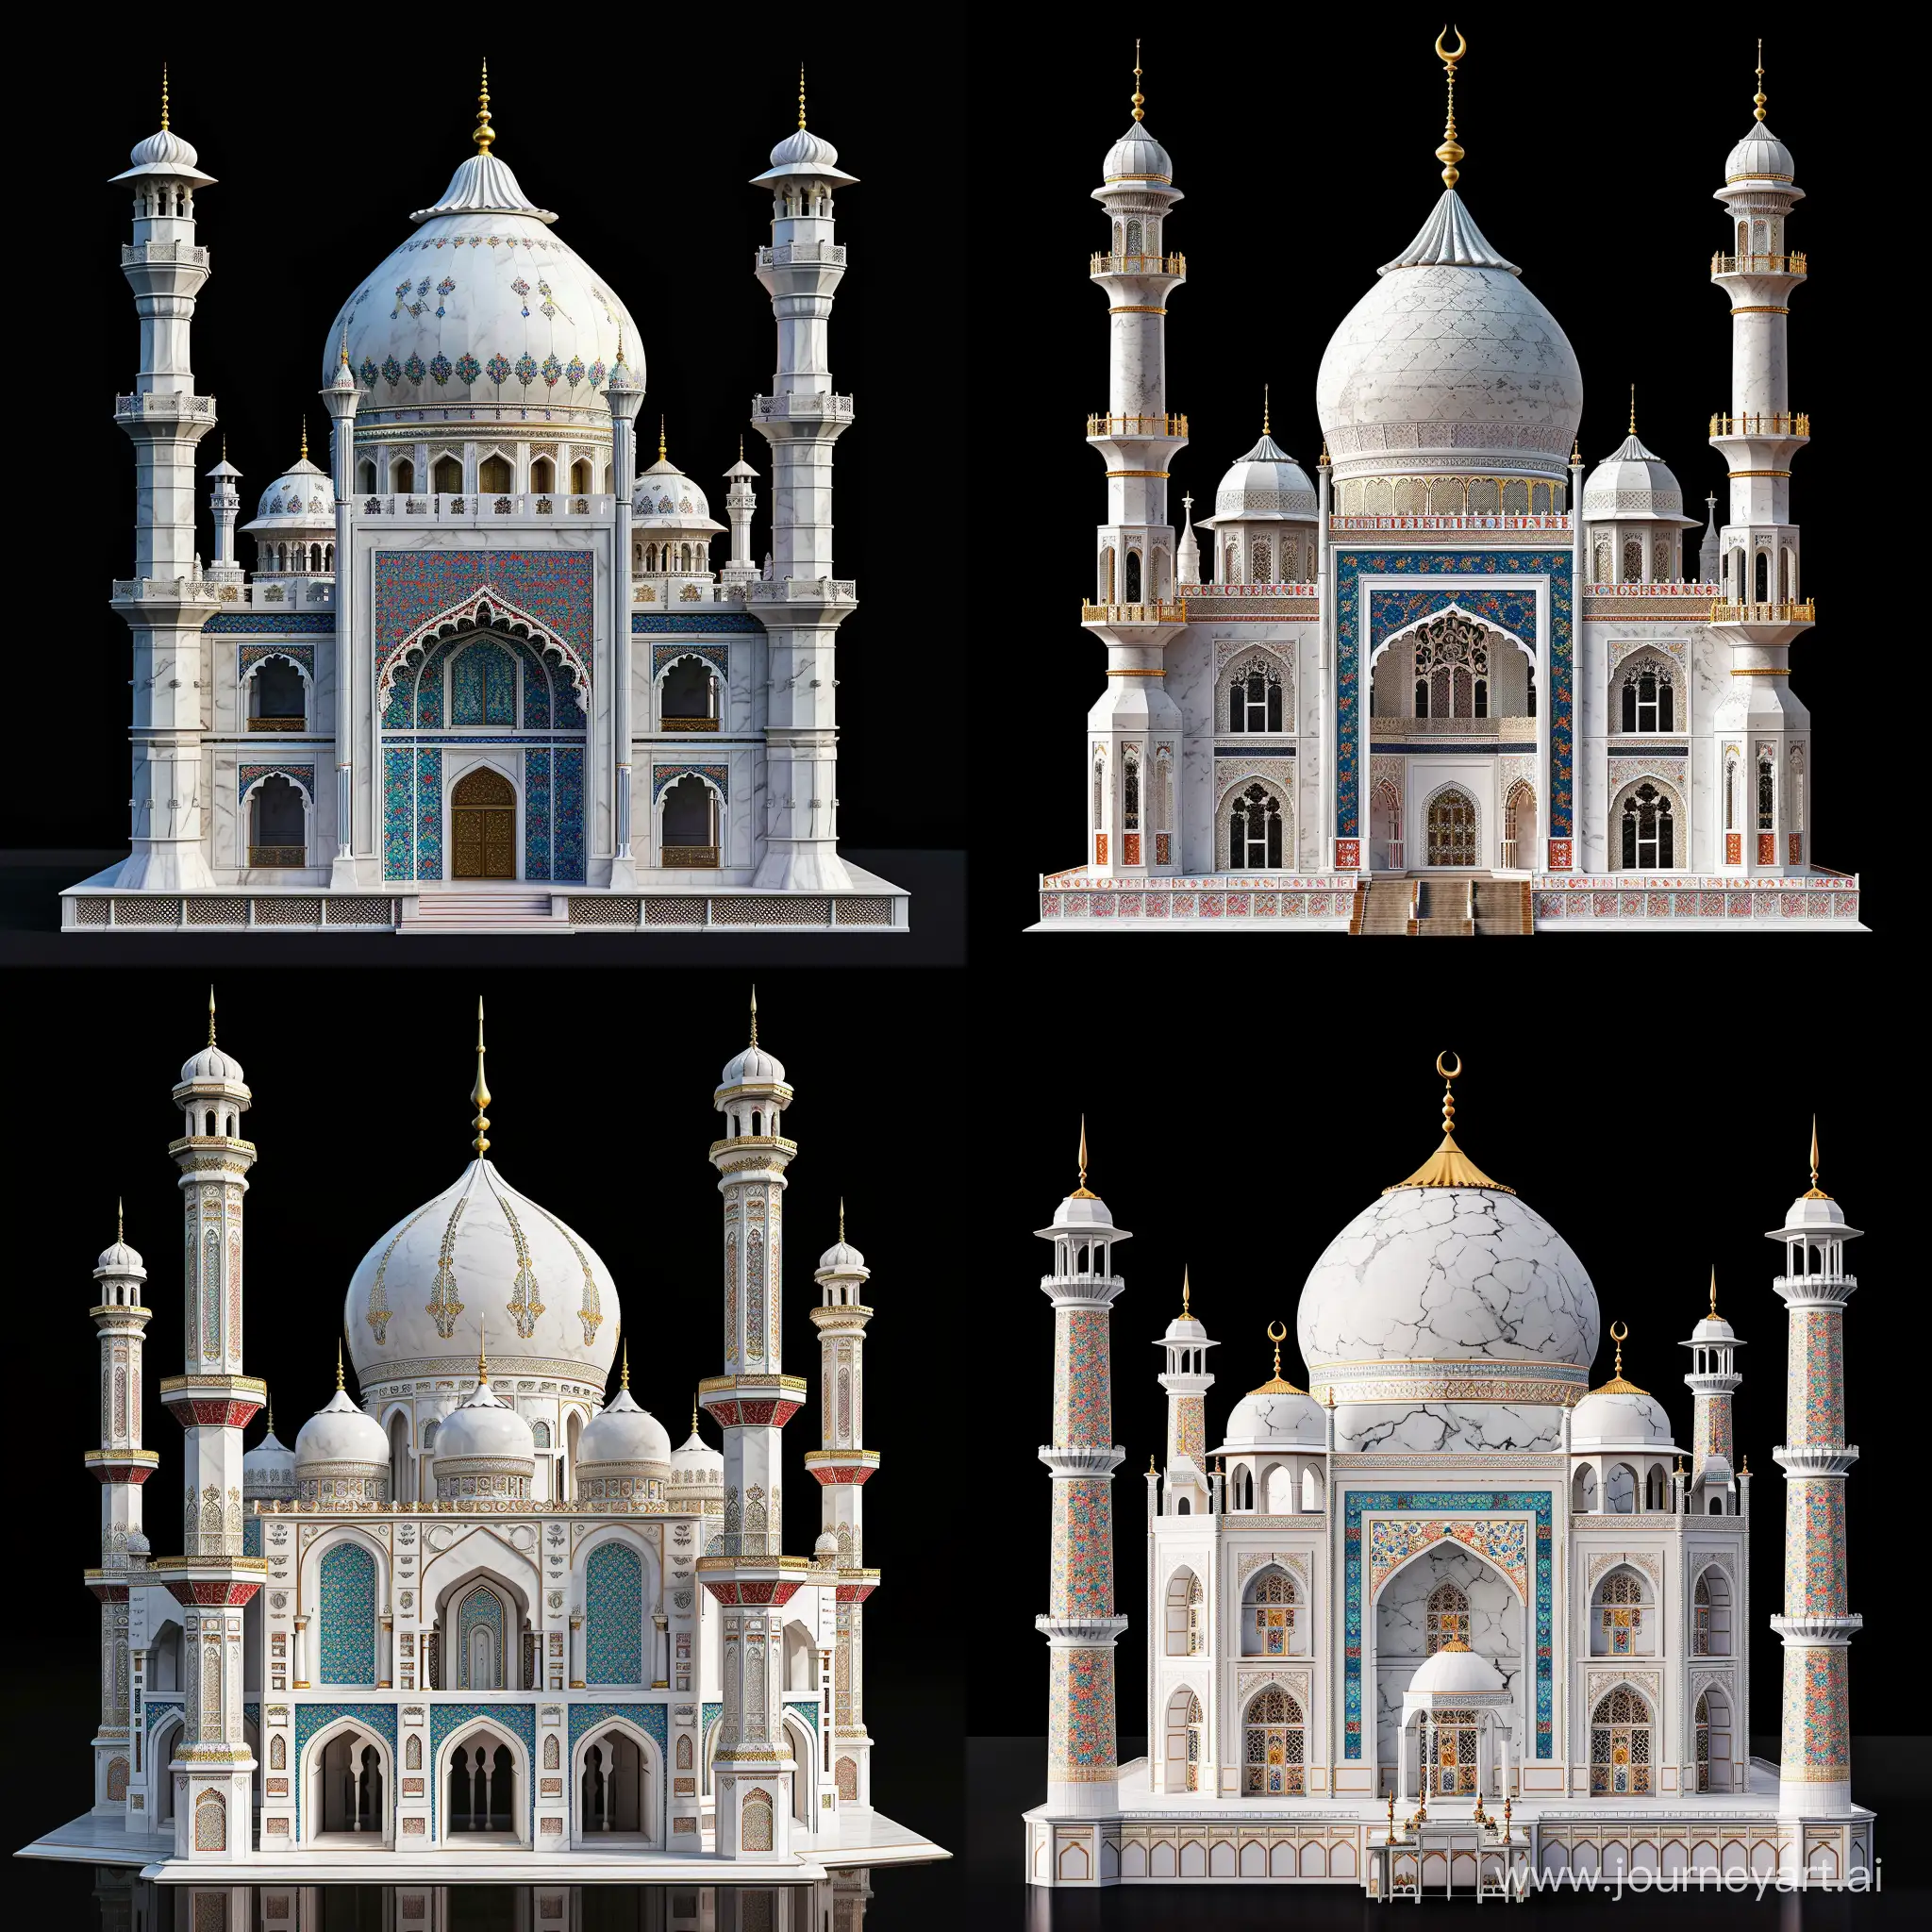 3d rendered: A Tall Umayyad mosque, Mughal dome and thin decorative Mughal spires minarets, Curved chala style Bengal roof, Gurudwara balconies, Rajput architecture curved jharokha windows and Rajasthan chhatri, Modern White marbled facade, blue red finely thin floral Mughal pietra dura/Persian tiles motifs, shiny gold finial and golden ornaments, black background, full view, front view, symmetric --v 6